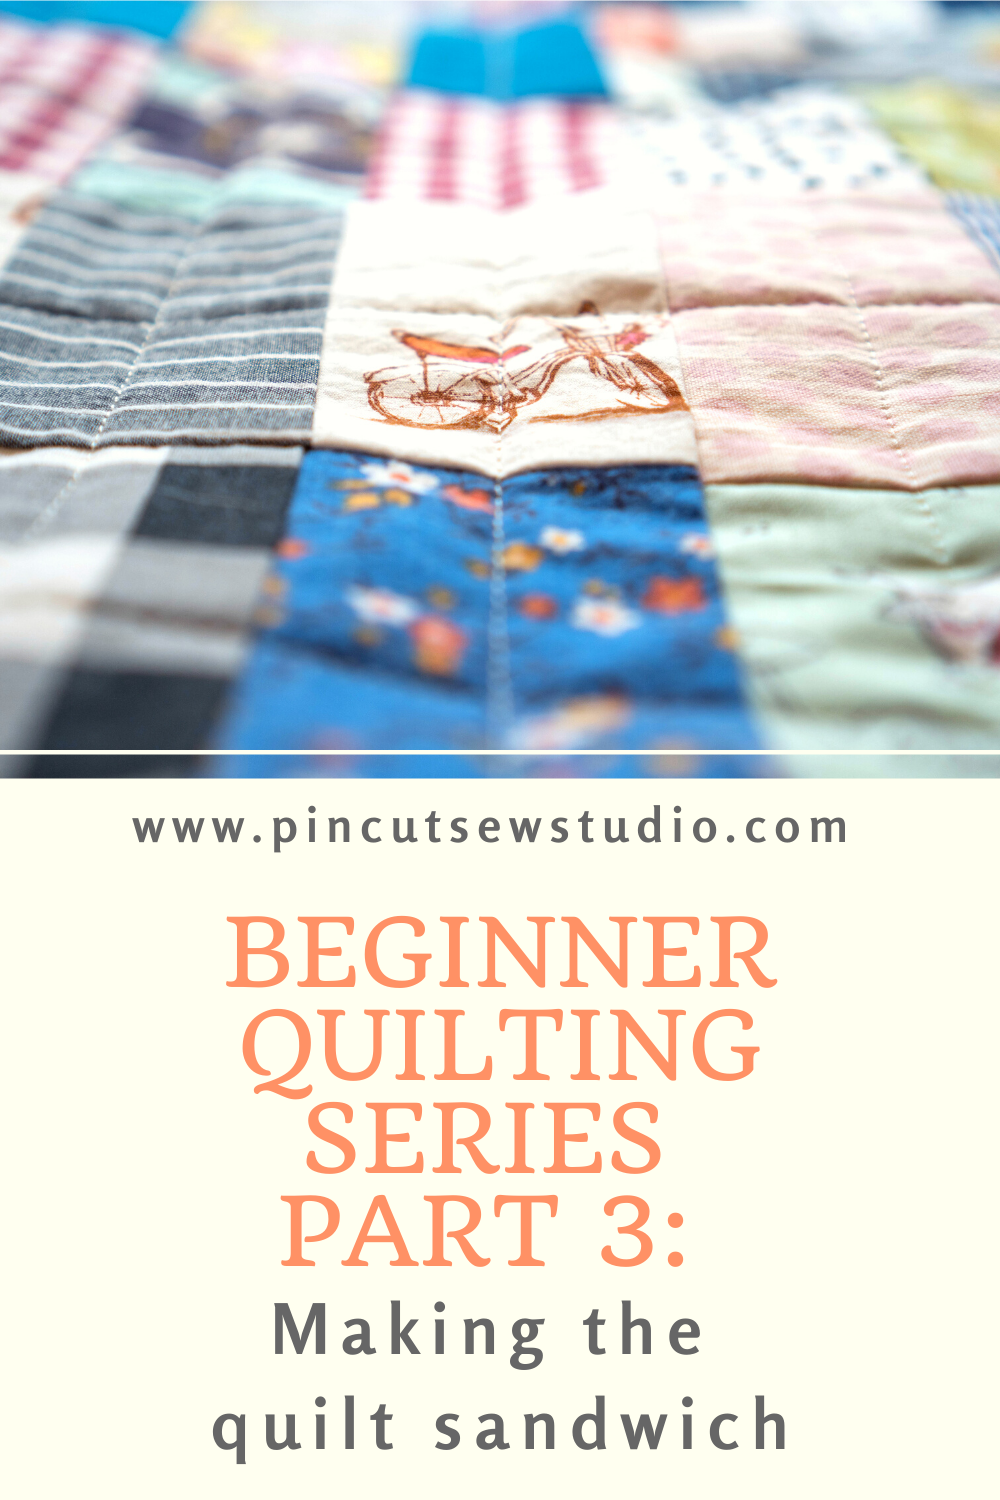 Quilting Supplies For Beginners (Best Tools To Start) - Sew Nikki